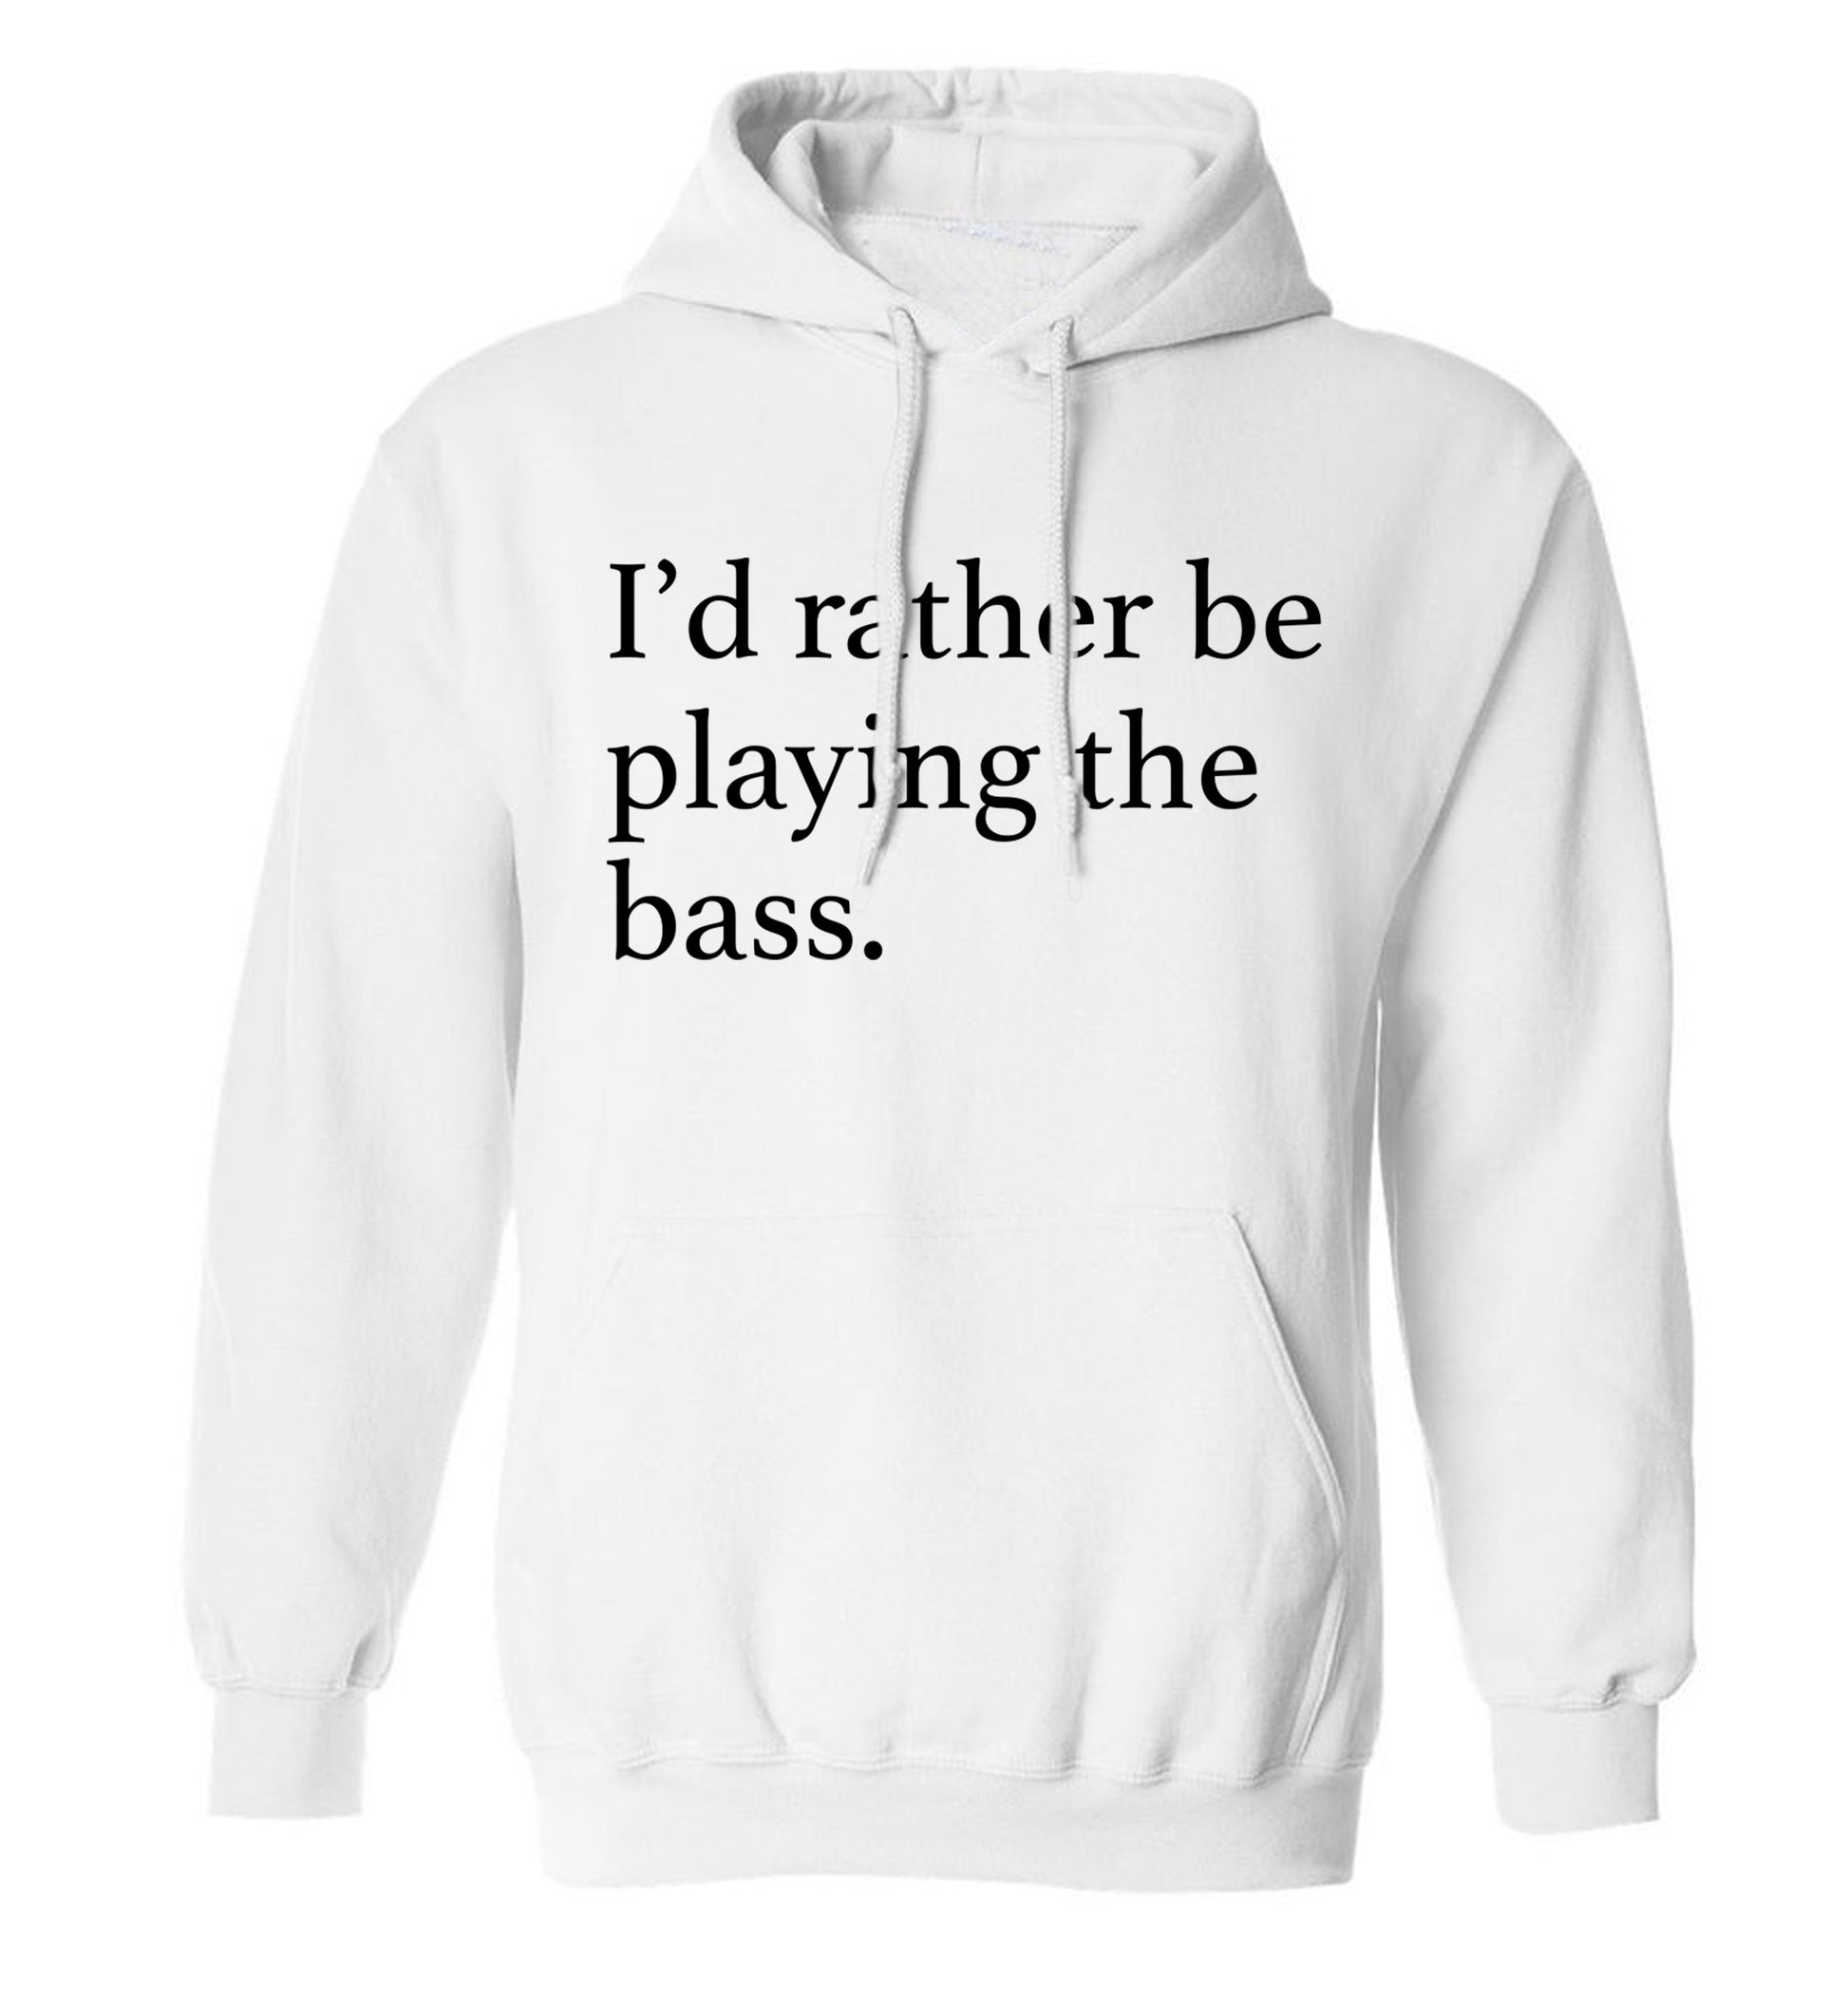 I'd rather by playing the bass adults unisex white hoodie 2XL